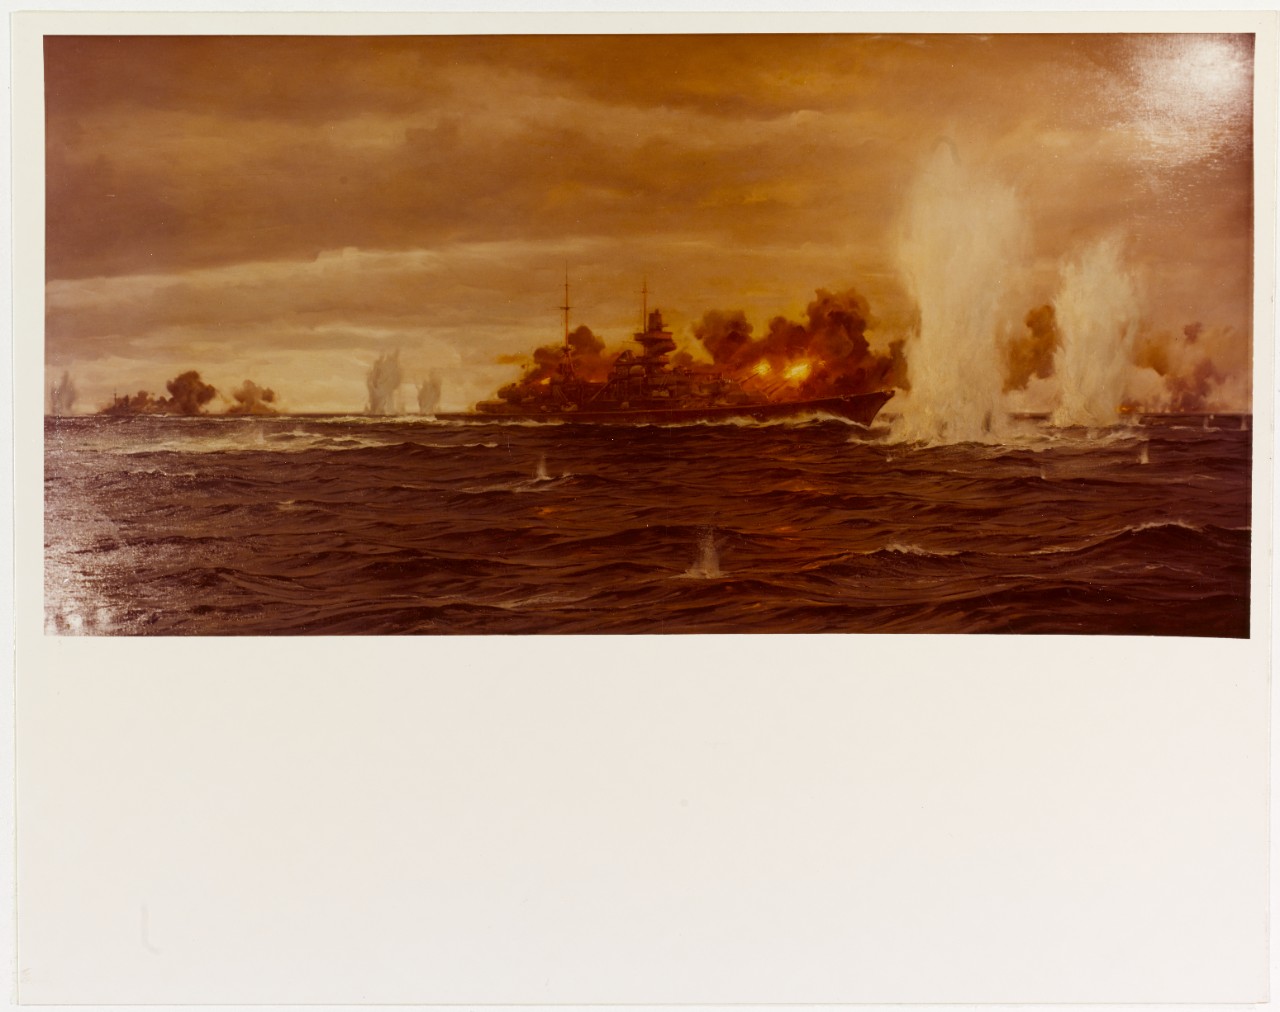 Photo #: NH 88404-KN Battle of the Denmark Strait, 24 May 1941